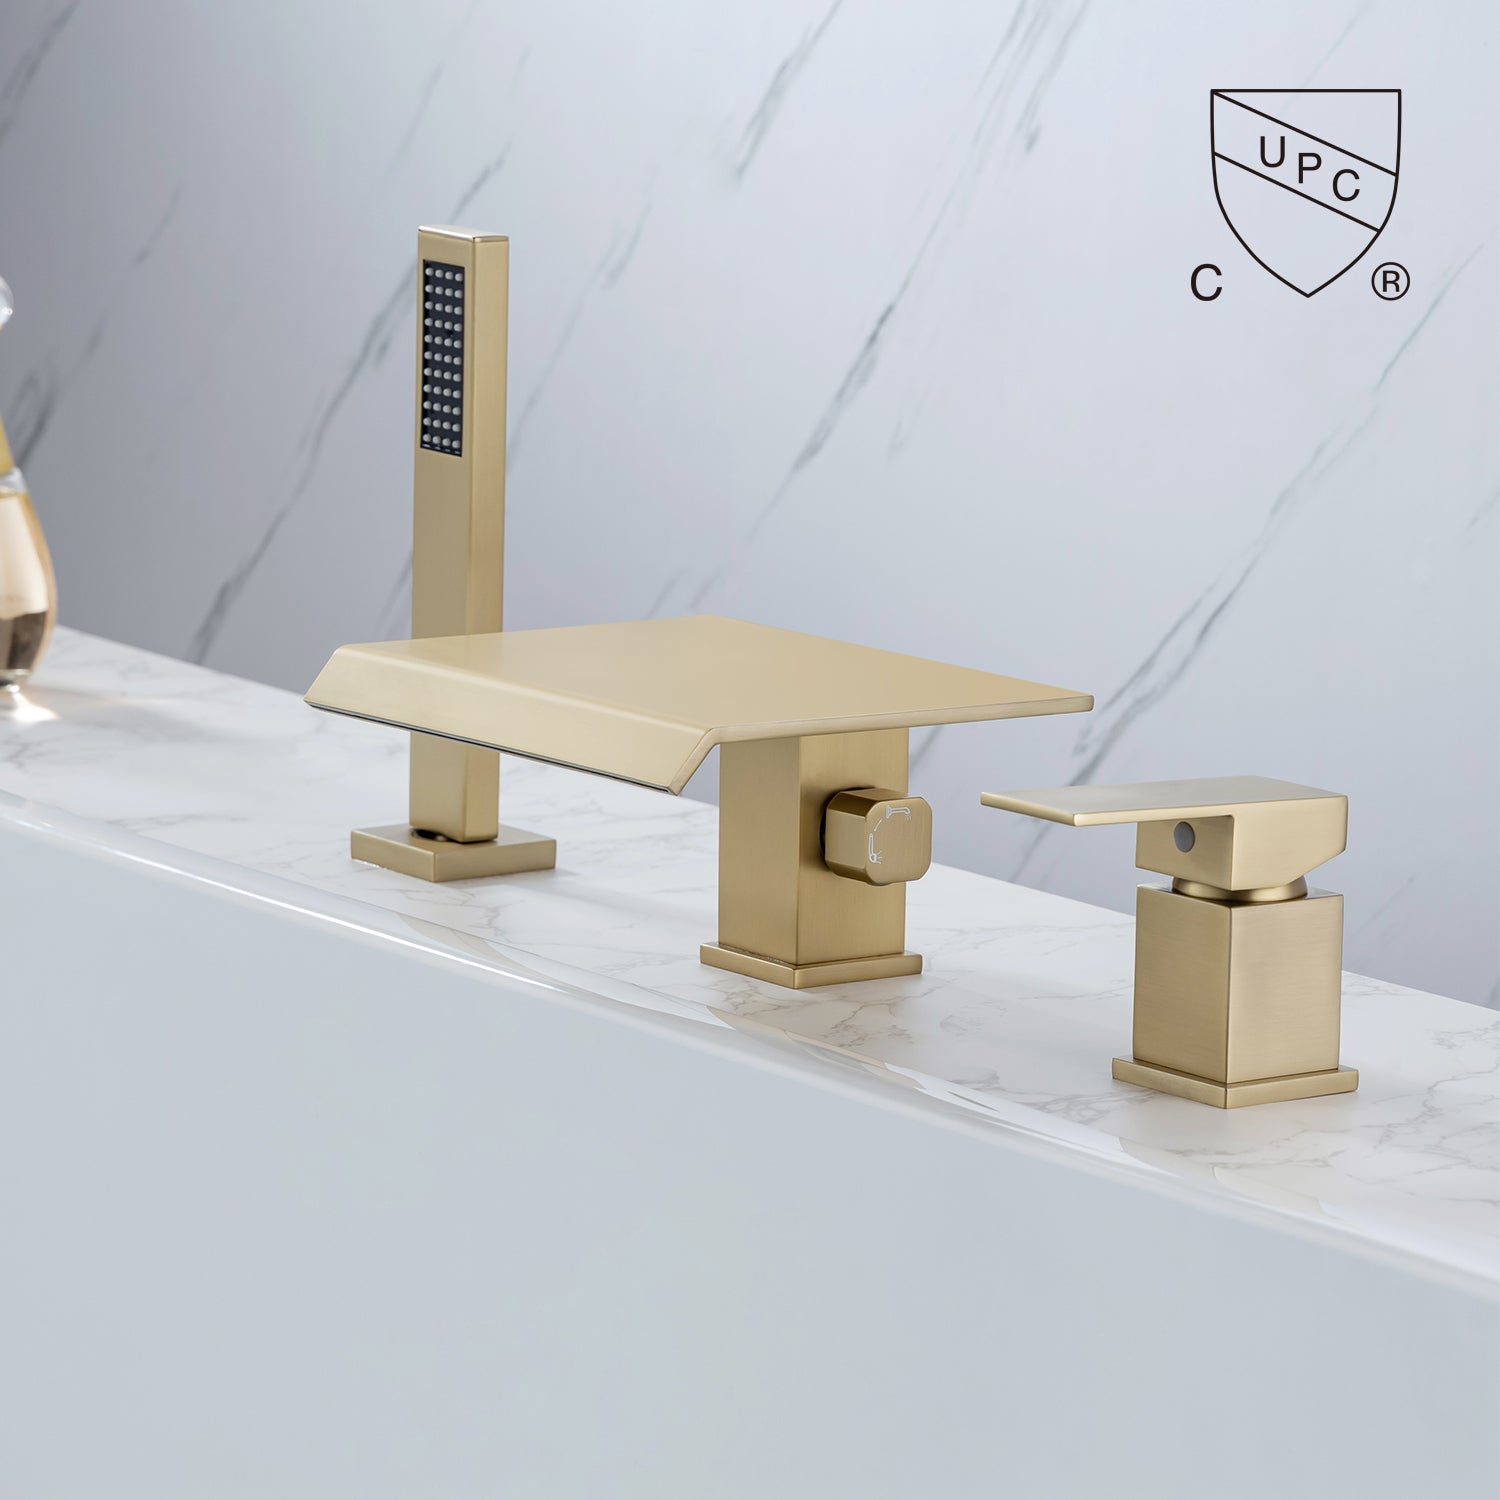 Deck Mounted Single-Handle Roman Tub Faucet with Diverter and Handheld shower RX8013